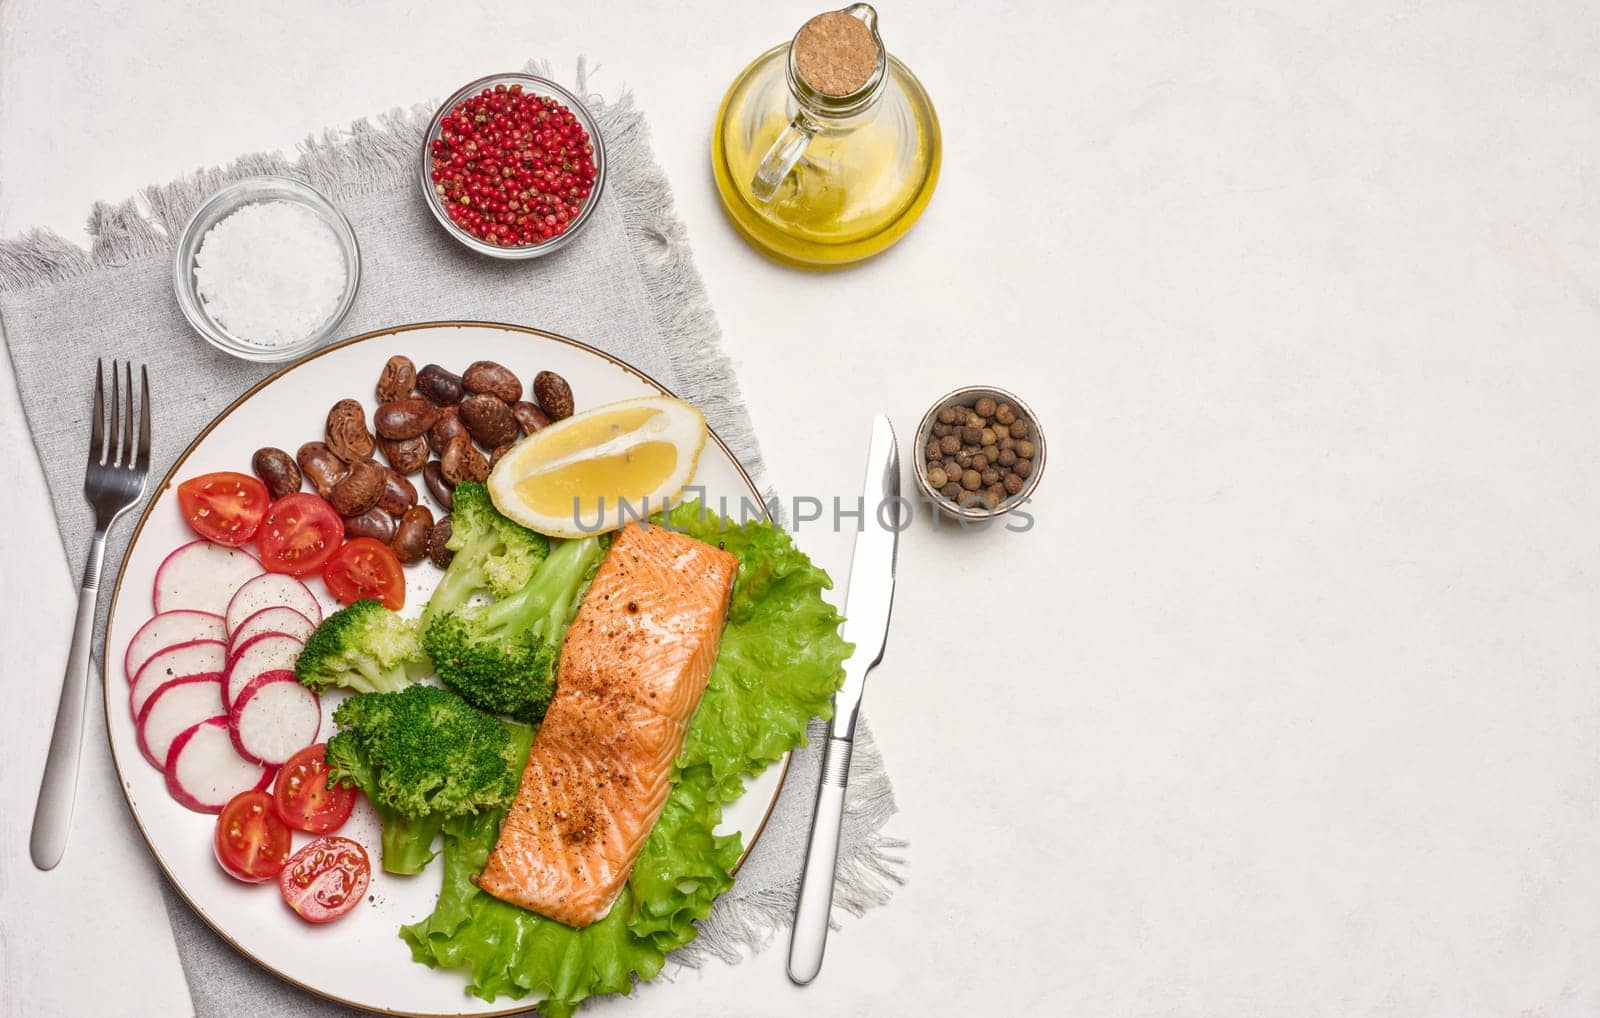 Healthy lunch with grilled salmon on green lettuce, next to vegetables, tomatoes, radishes, broccoli and a portion of beans.